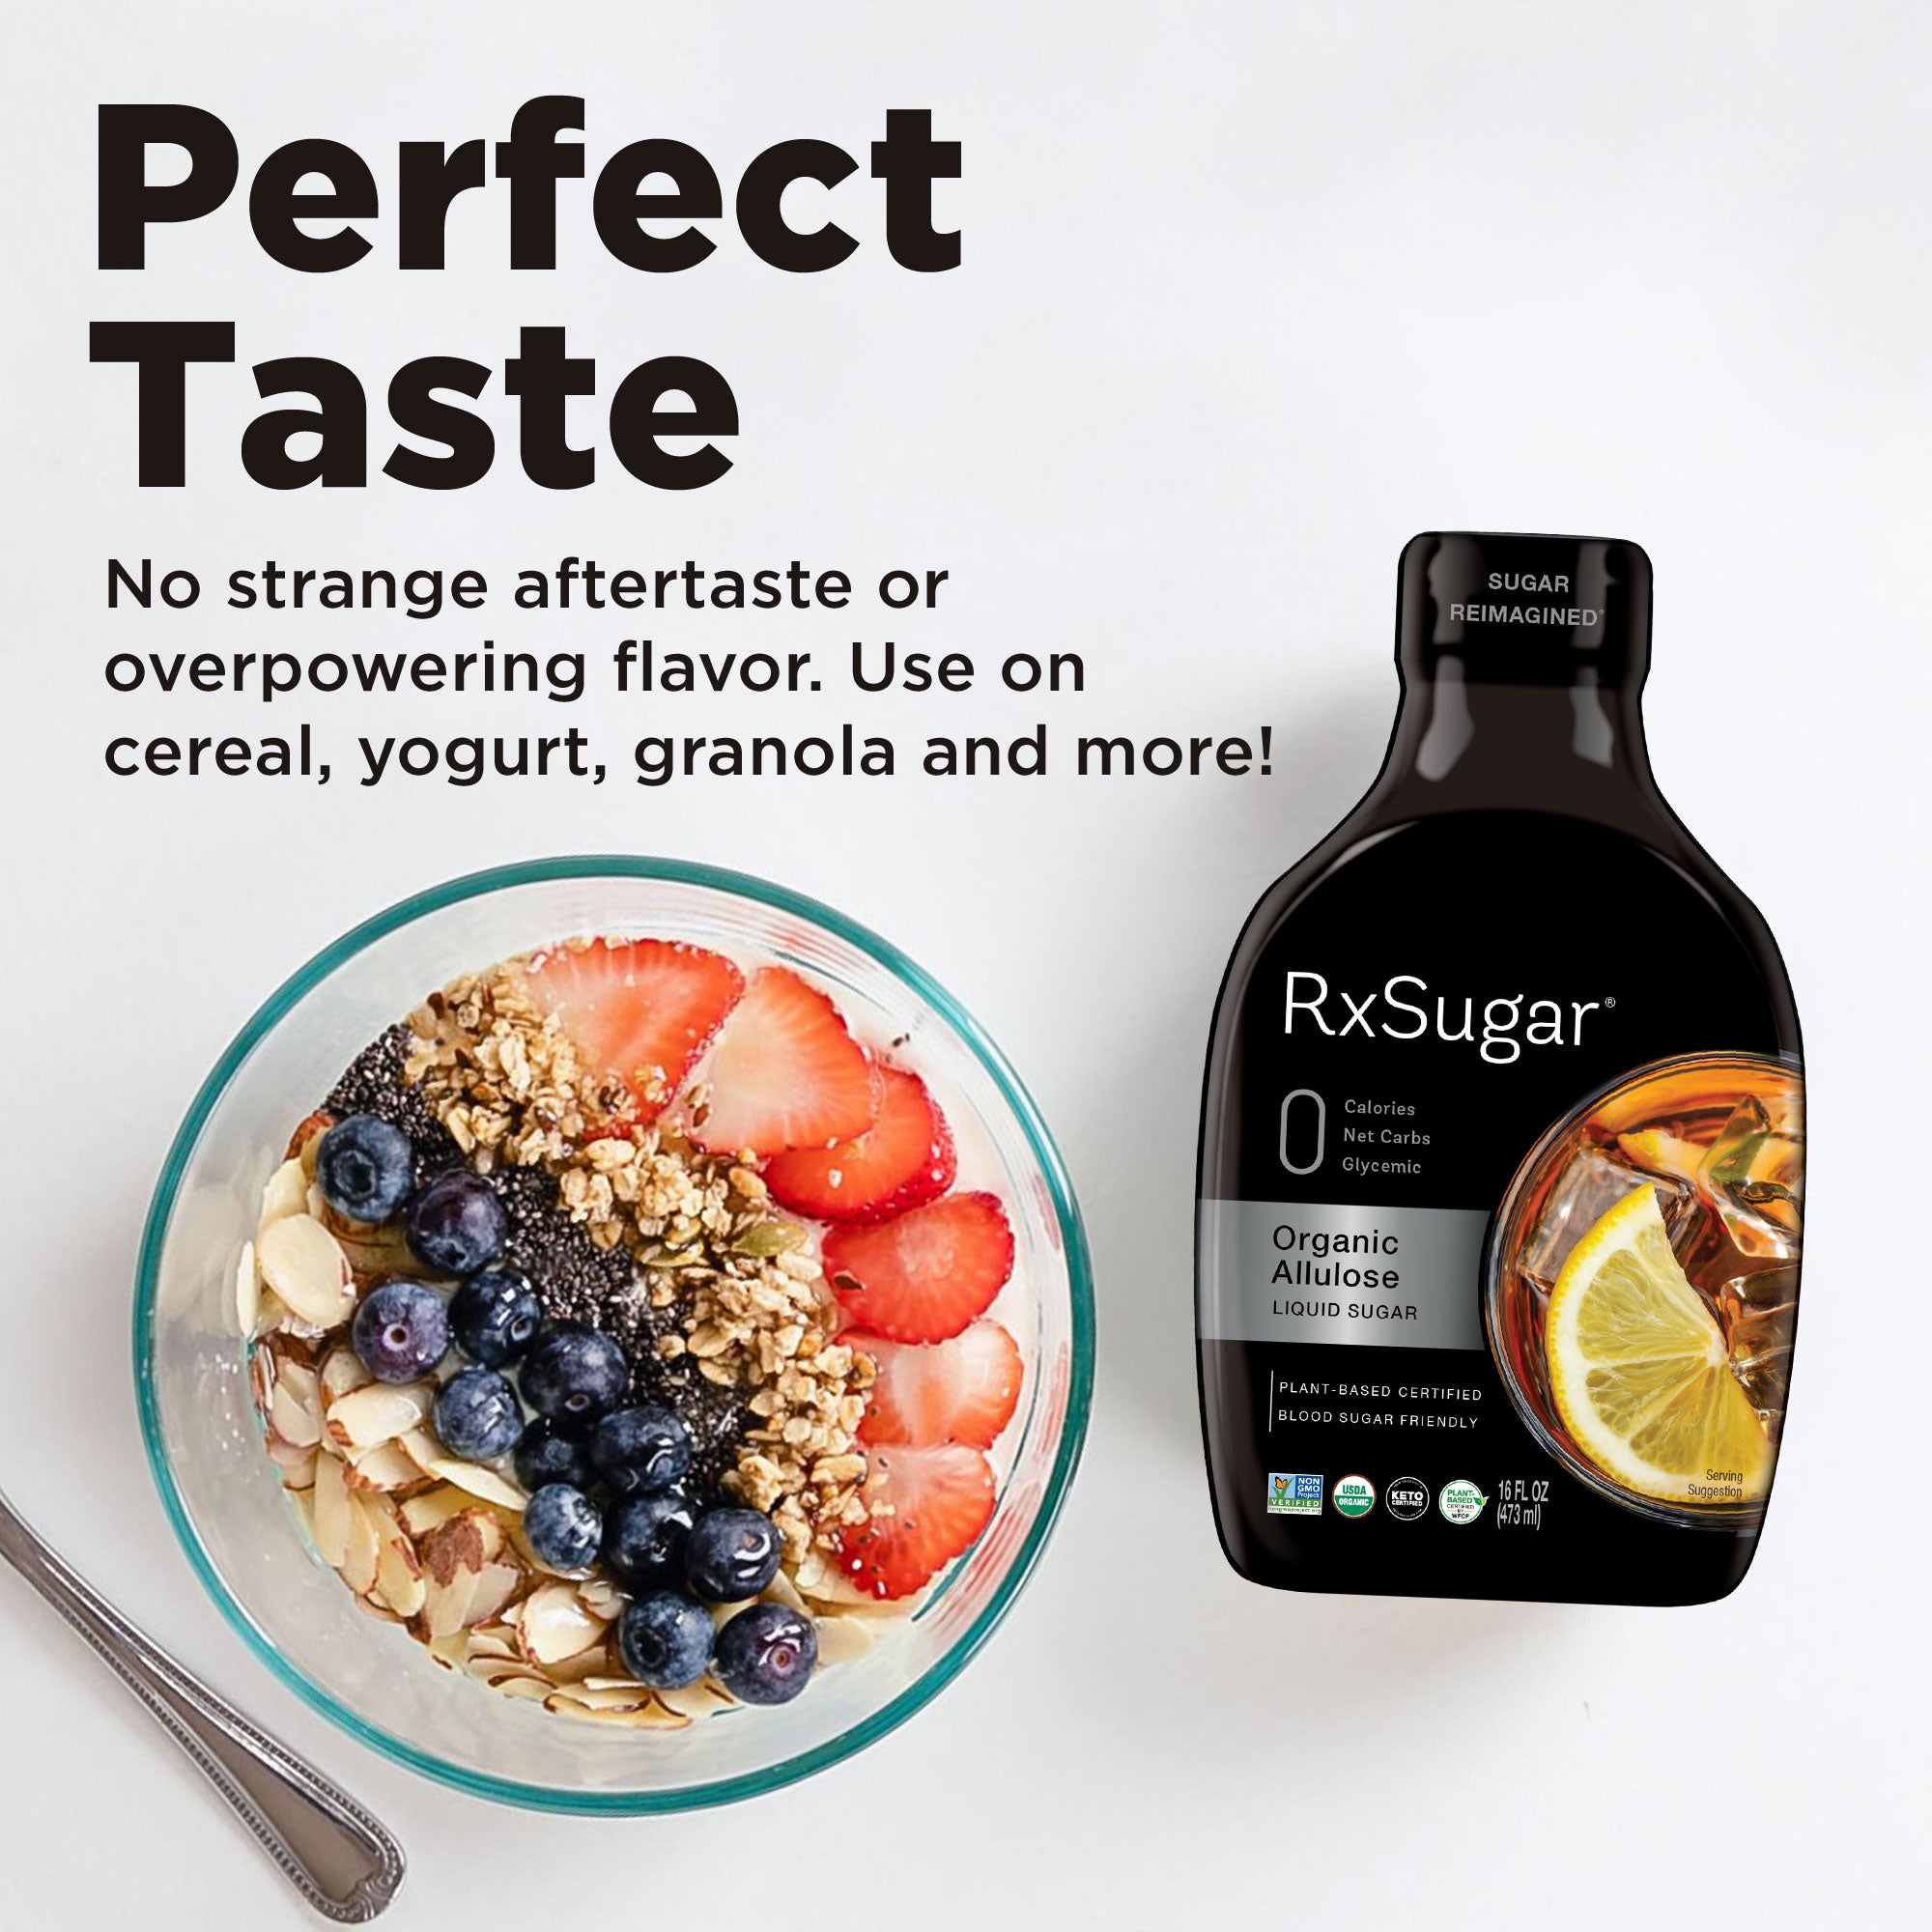 Perfect taste. No strange aftertaste or overpowering flavor. Use on cereal, yogurt, granola, and more. Photo of granola and fruit bowl with RxSugar.